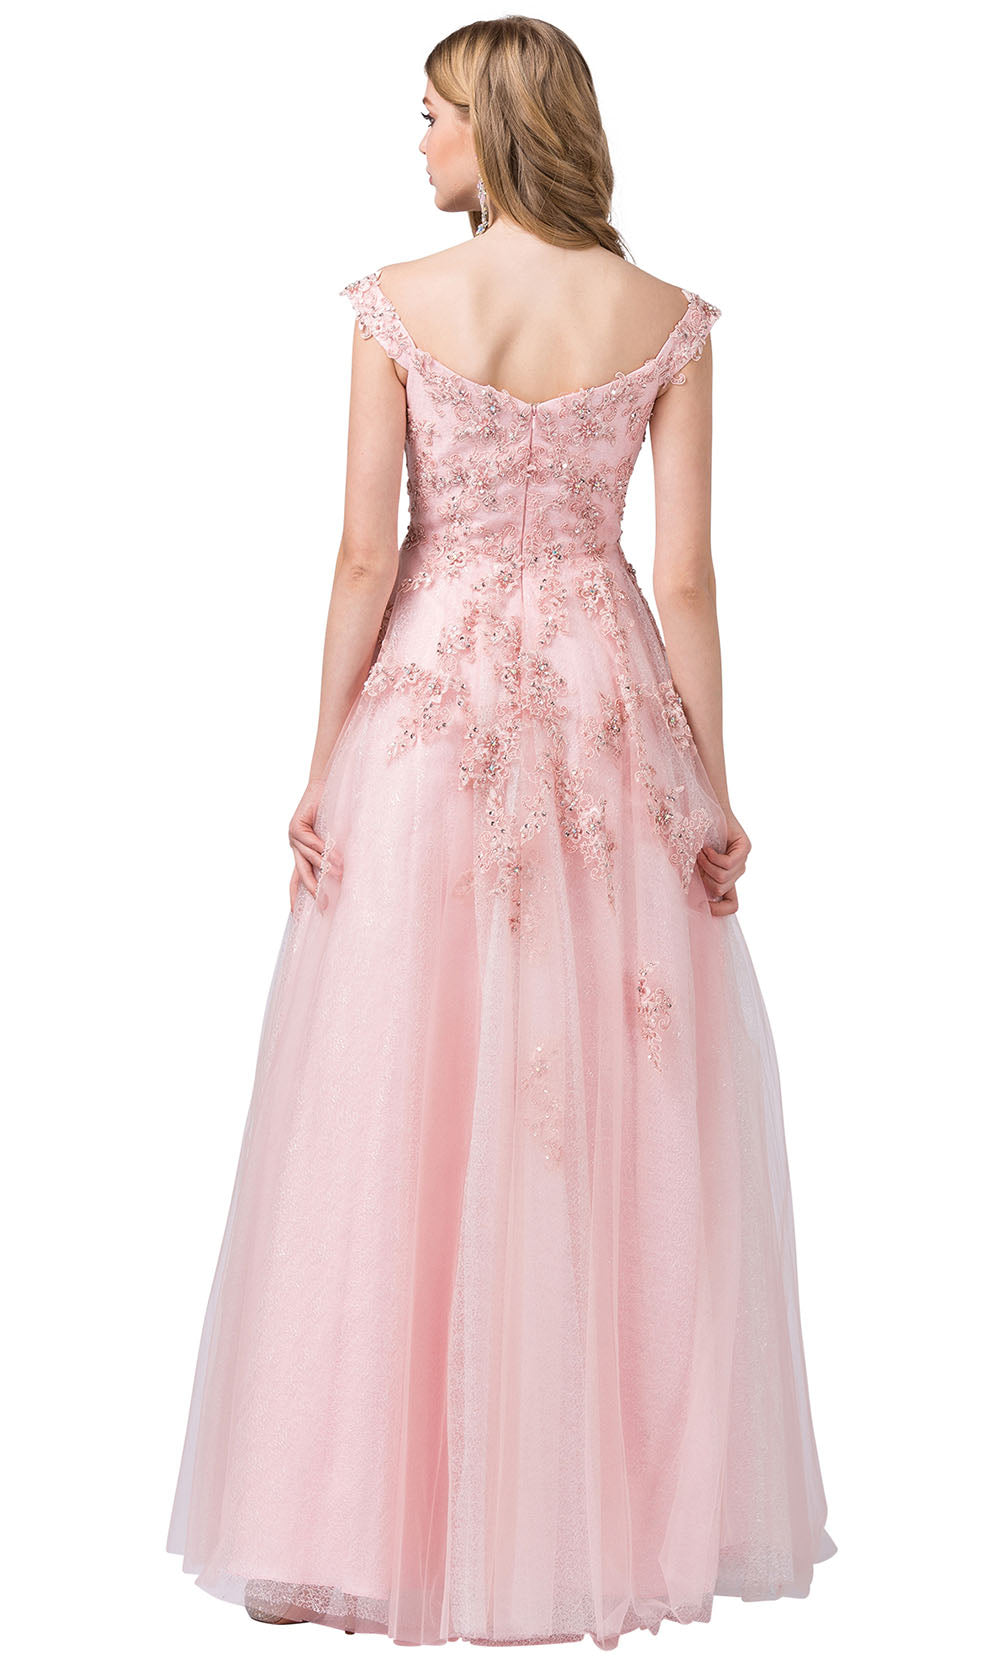 Dancing Queen - 2600 Embroidered Cap Sleeve V Neck A-Line Gown In Pink